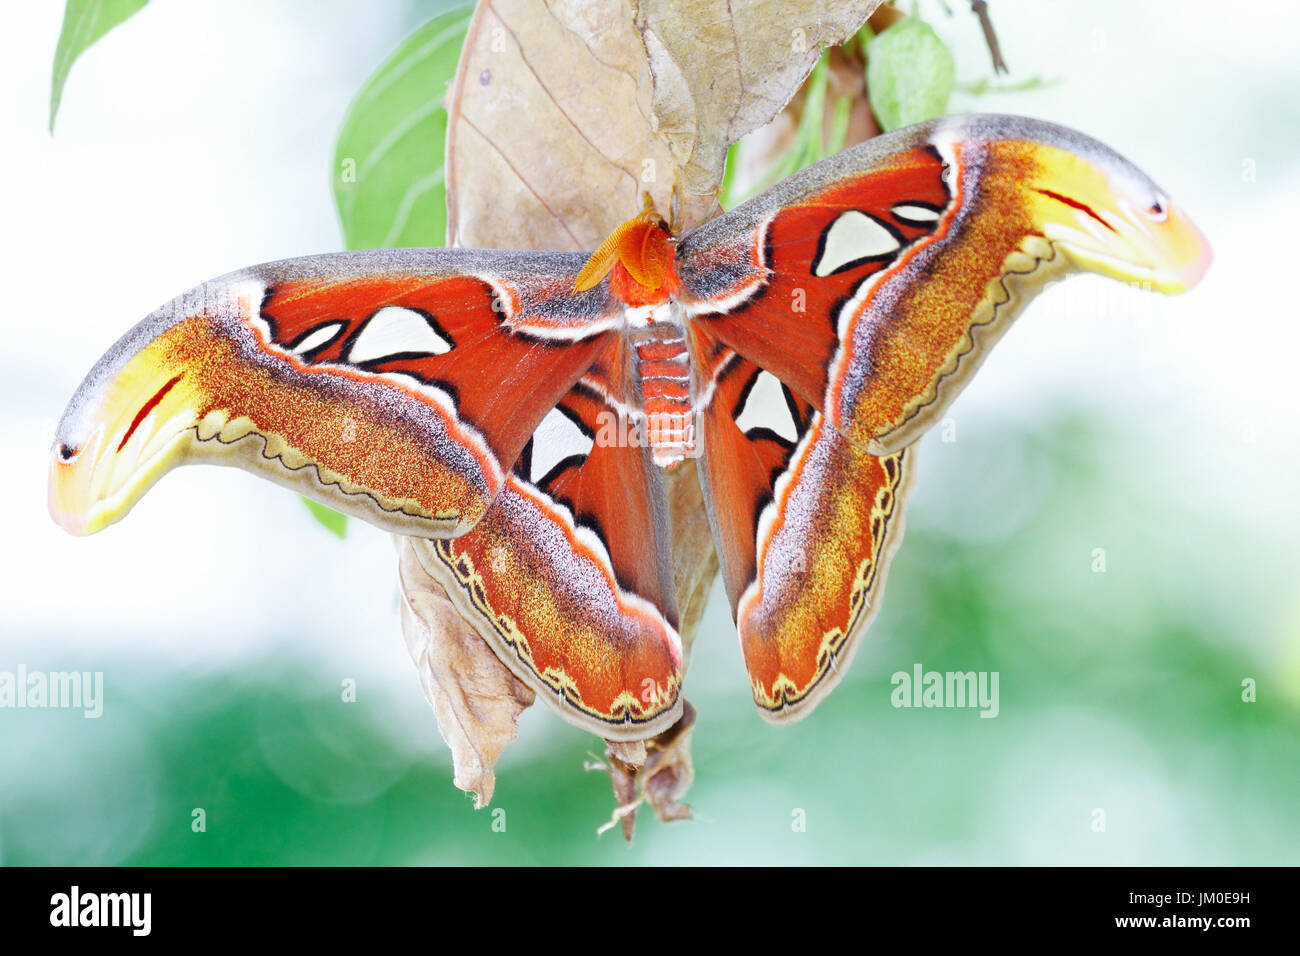 A new adult Atlas moth emerge from the cocoon. Atlas moth (Attacus atlas) is the world largest moths found in the tropical and subtropical forests of Stock Photo